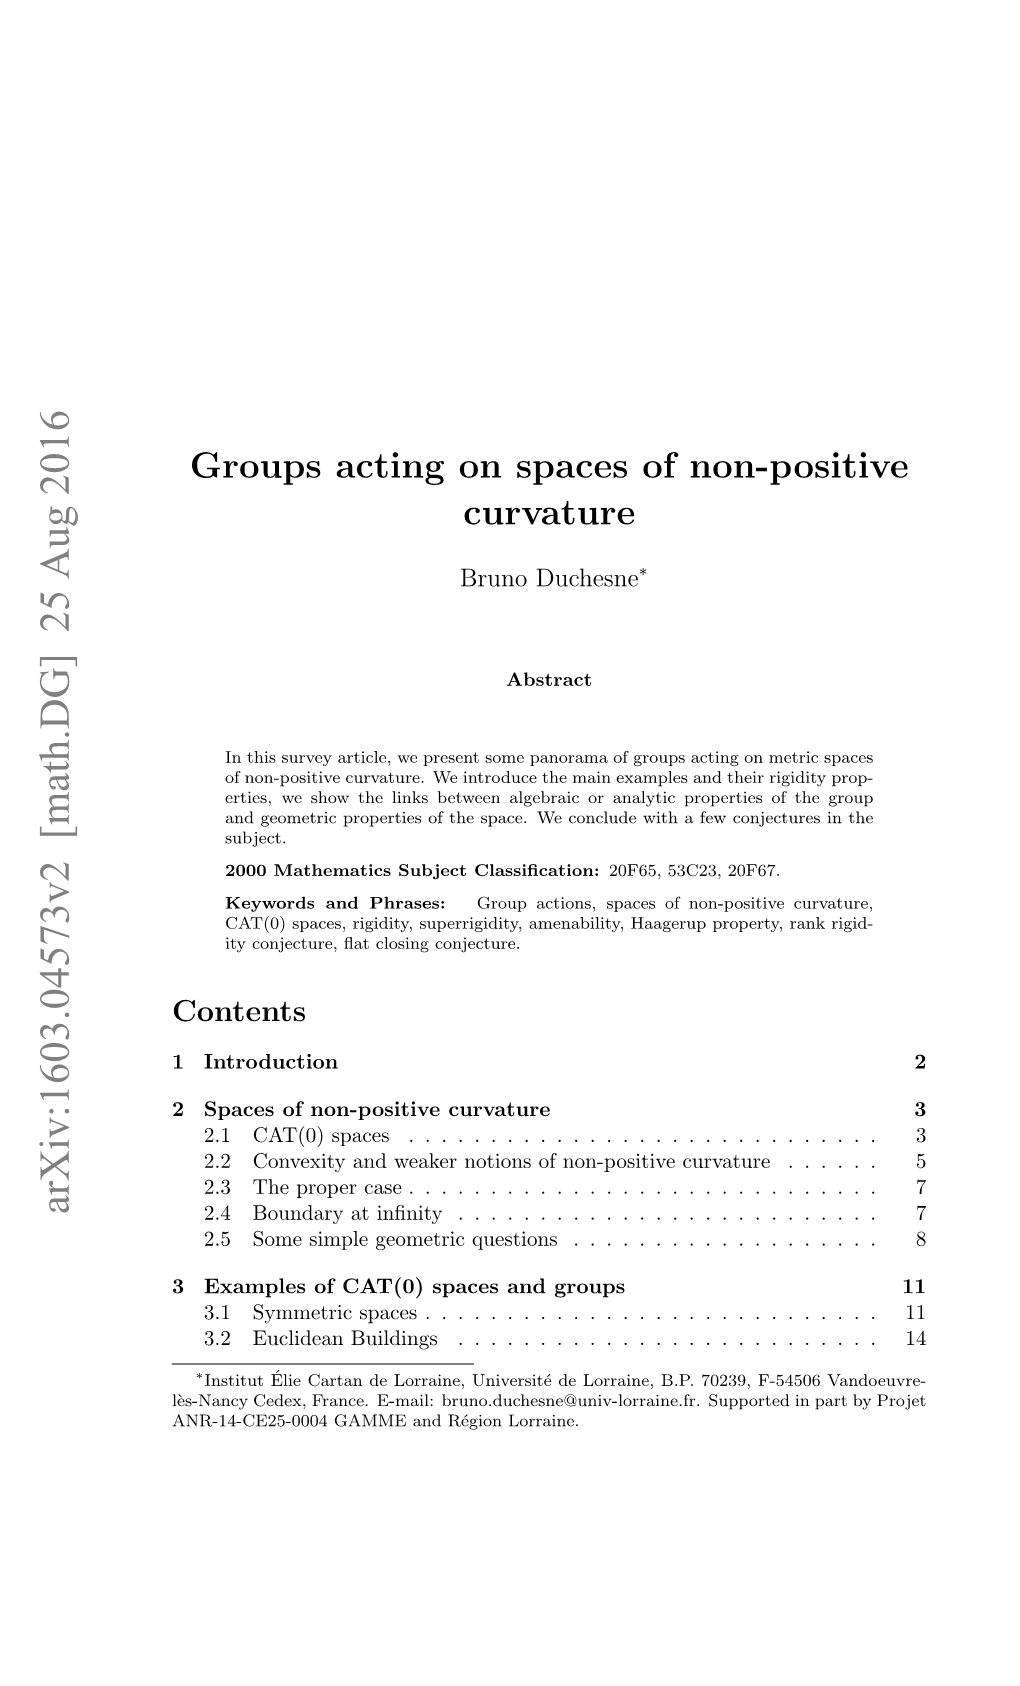 Groups Acting on Spaces of Non-Positive Curvature